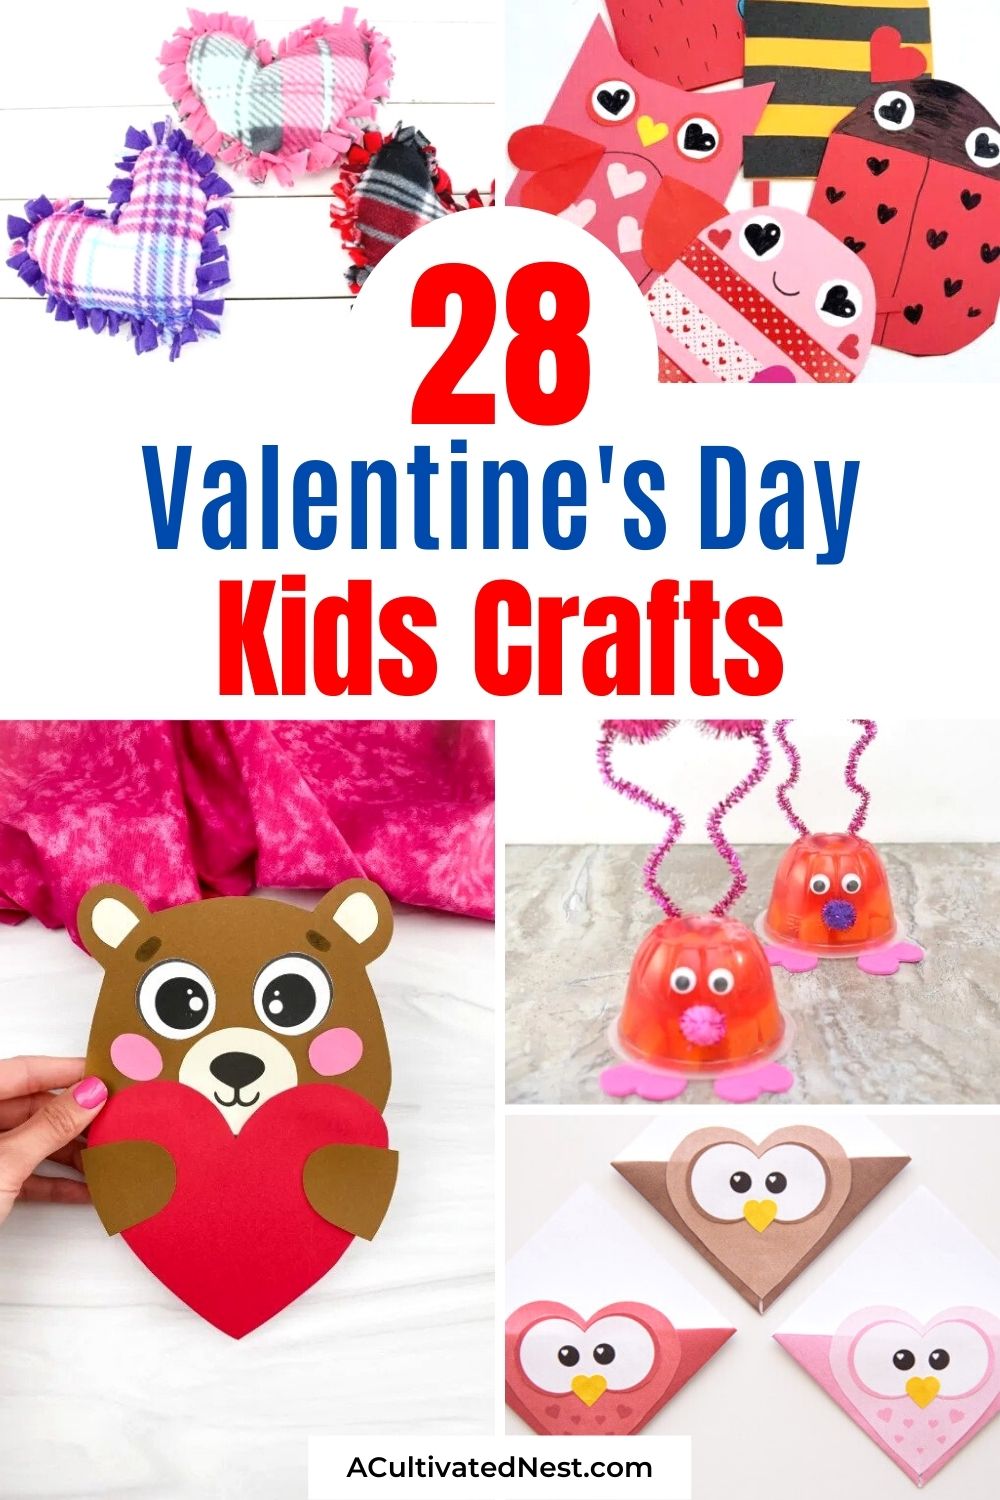 28 Valentine’s Day Kids Crafts Your Kids Will Love- For an easy and frugal way to help your kids celebrate Valentine's this year, check out these fun Valentine's Day kids crafts! | #ValentinesDayKidsCrafts #ValentinesDay #kidsCrafts #kidsActivities #ACultivatedNest